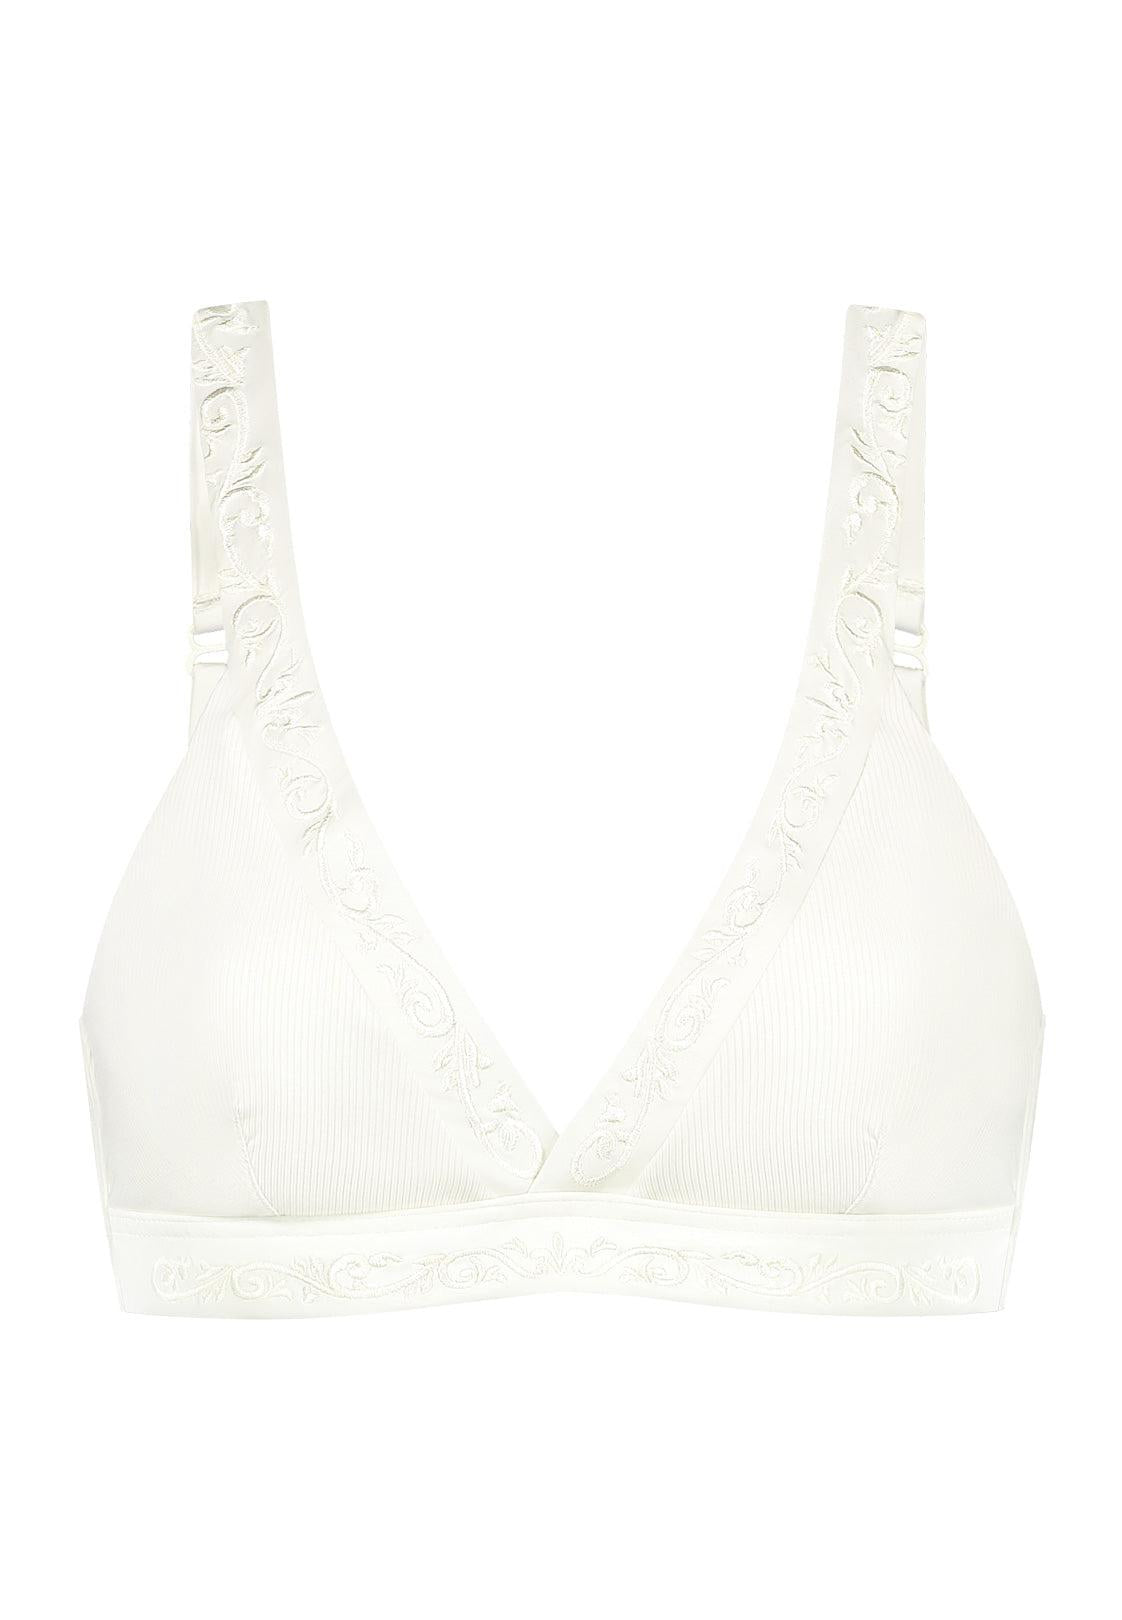 Bikini top Plunge V-neck in white with rib fabric and embroidery 